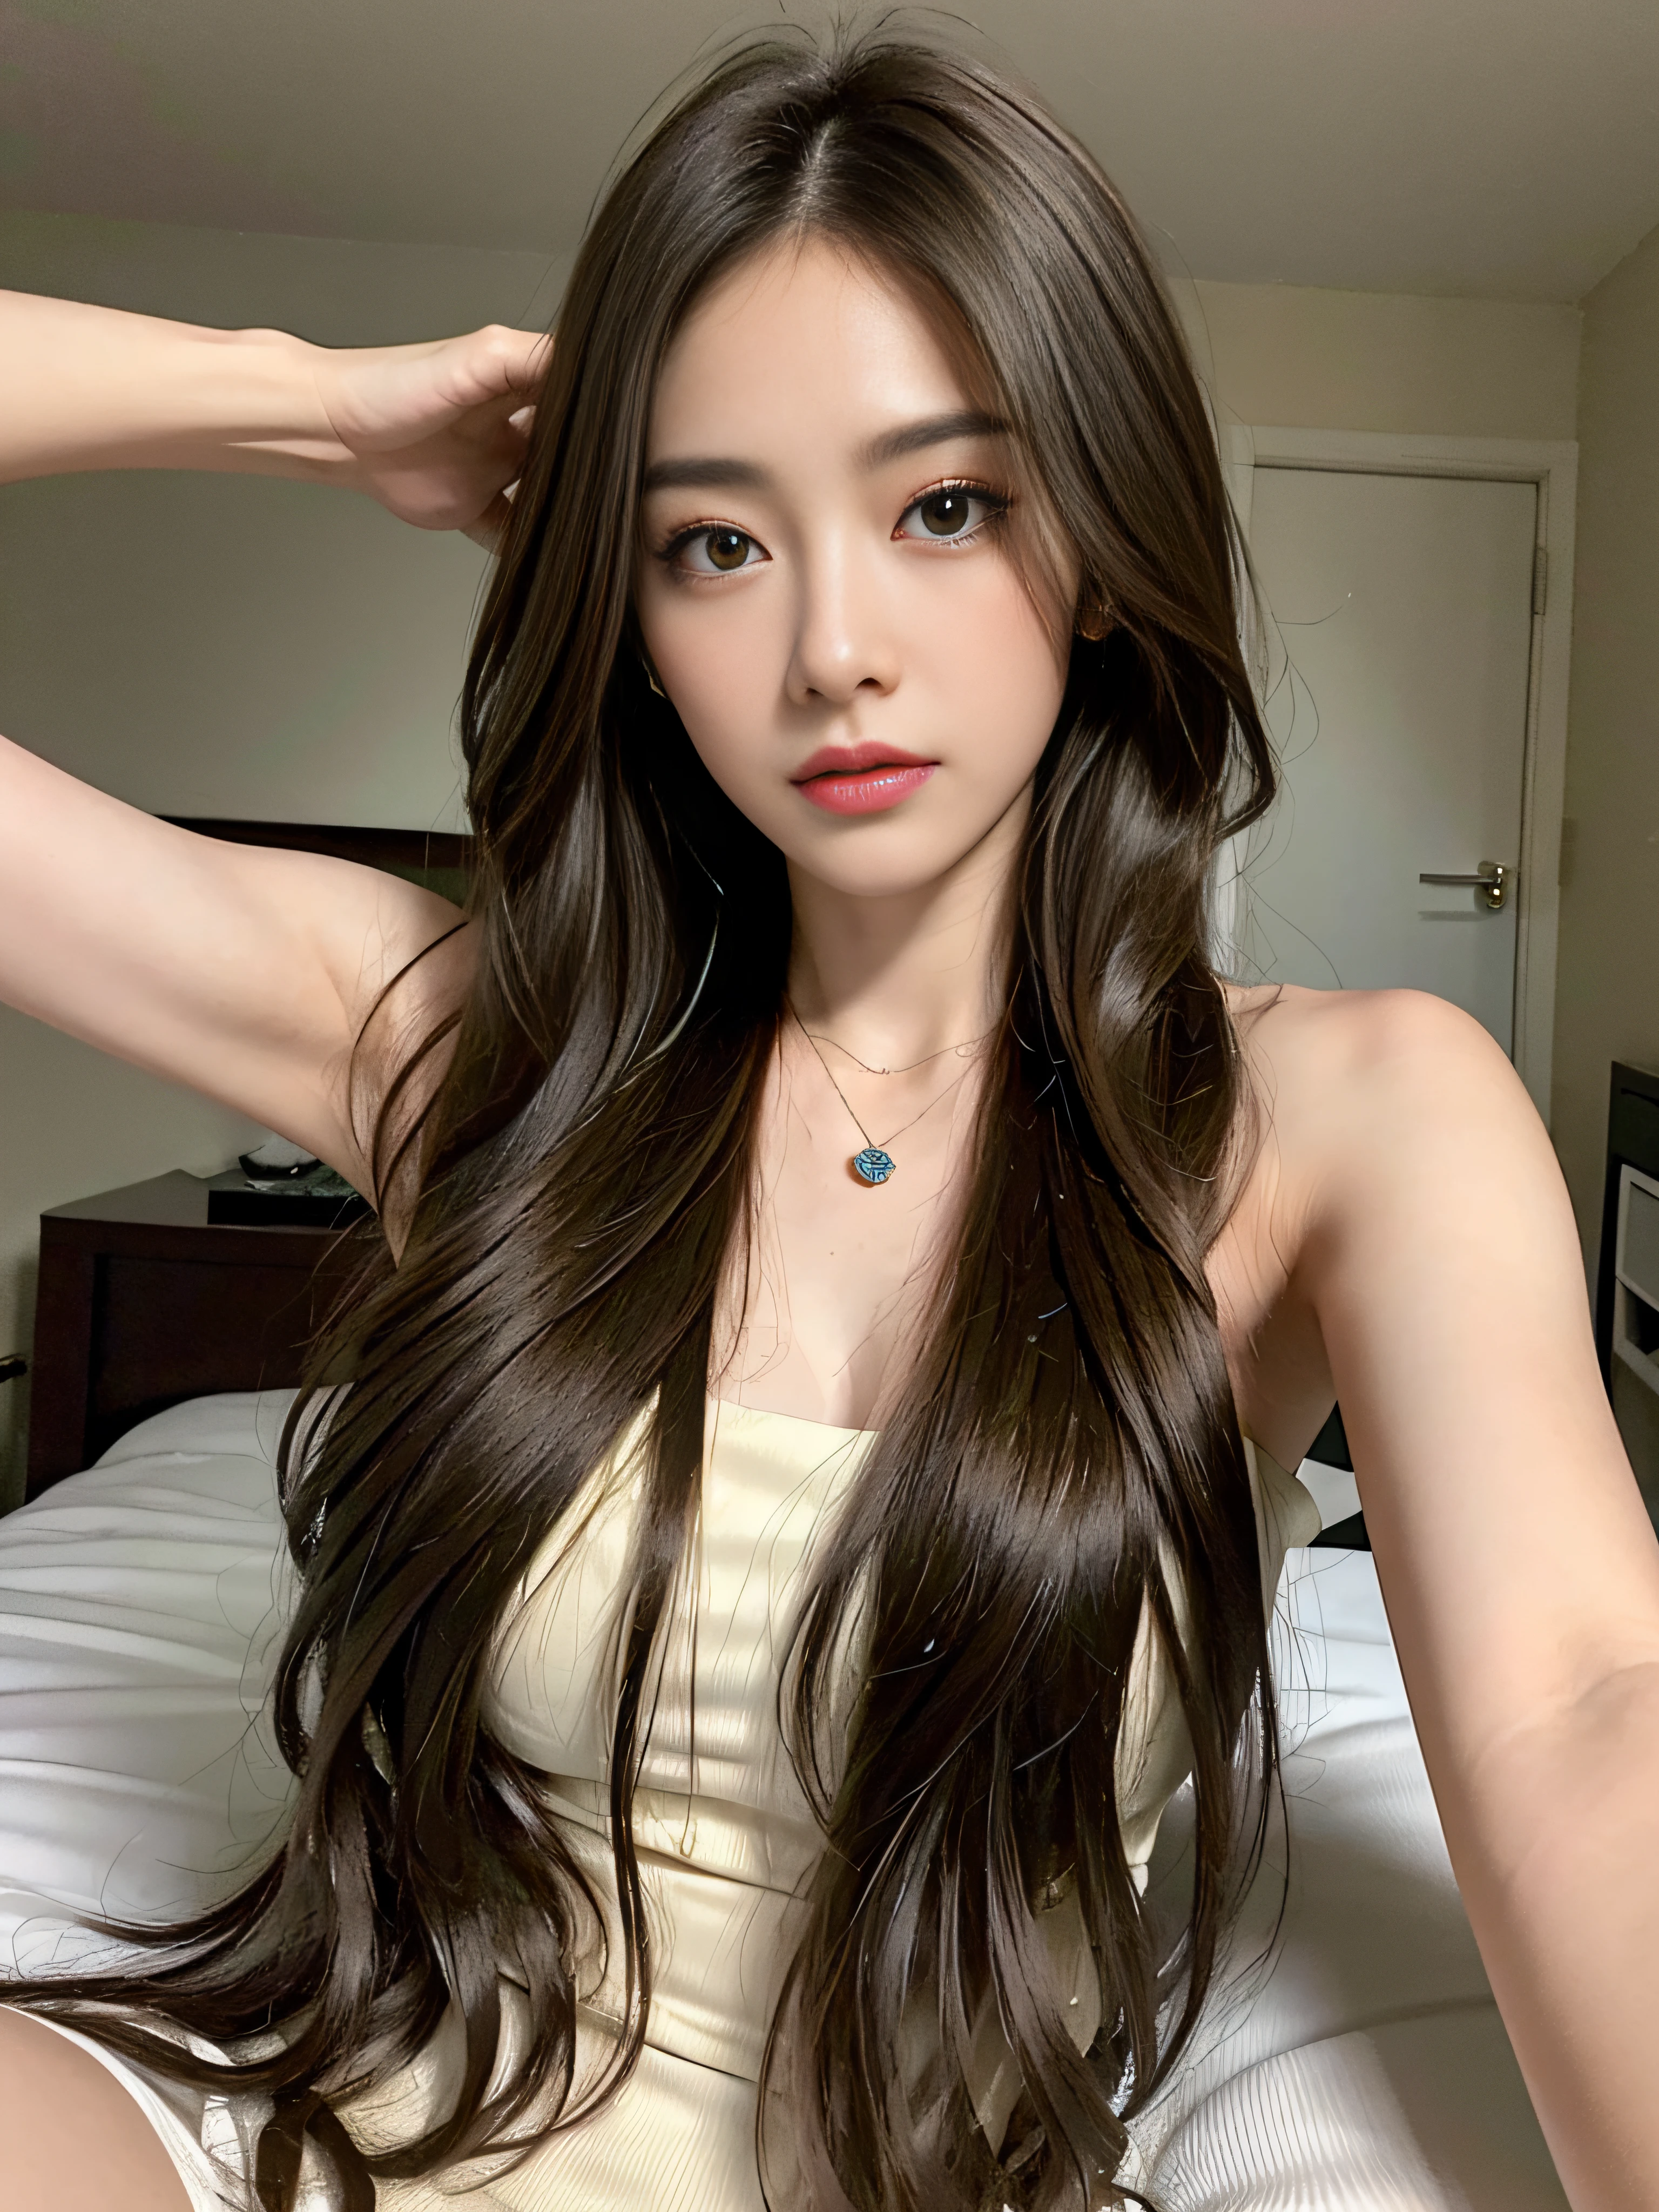 ((Realistic lighting、top-quality、8K、​masterpiece:1.3))、Clear focus:1.2、SNFW:1.2,((nude:1.3))、1girl in、perfectbodybeauty:1.4、Slim abs:1.1、dark-brown eyes、((dark brown hair、middlebreasts:1.2))、(Acceleration:1.4)、Slender face、on the beds、laying on back、Lying、Open your legs、Looking at the camera、(24 year old:1.3)、hyperdetailed face、A detailed eye、double eyelid、a necklace、Bird's eye view